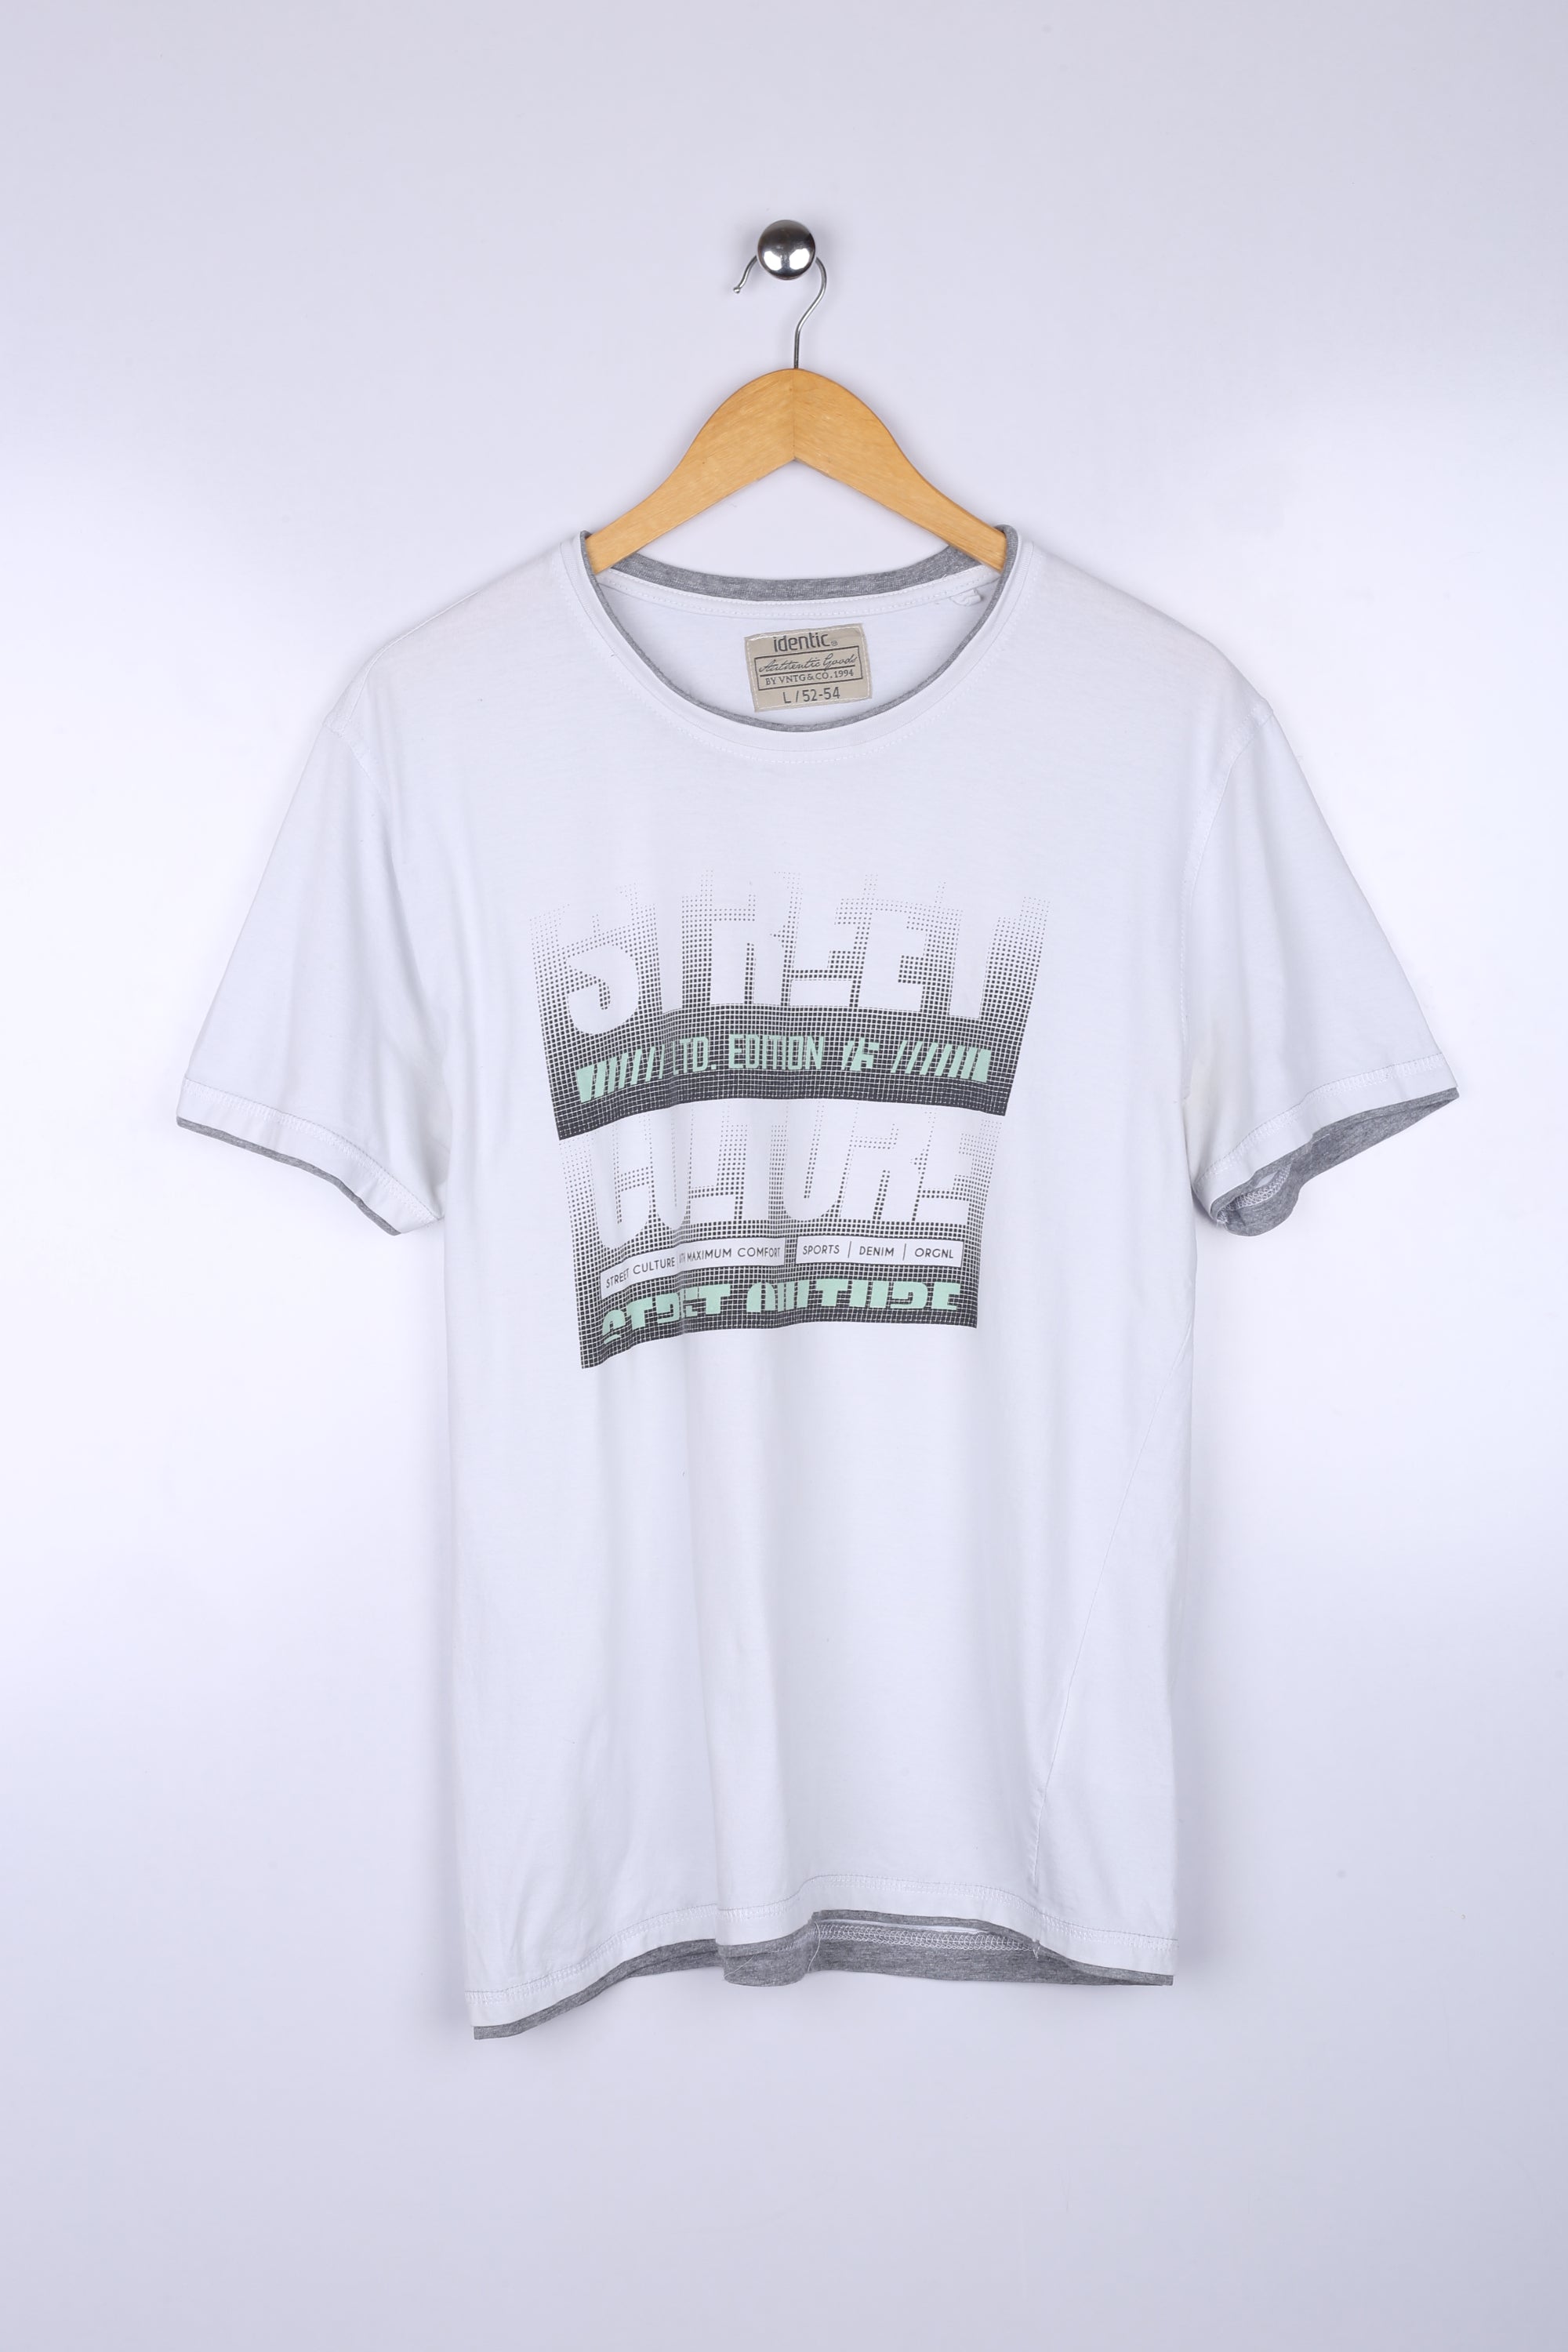 Vintage Identic Graphic Tee White Large